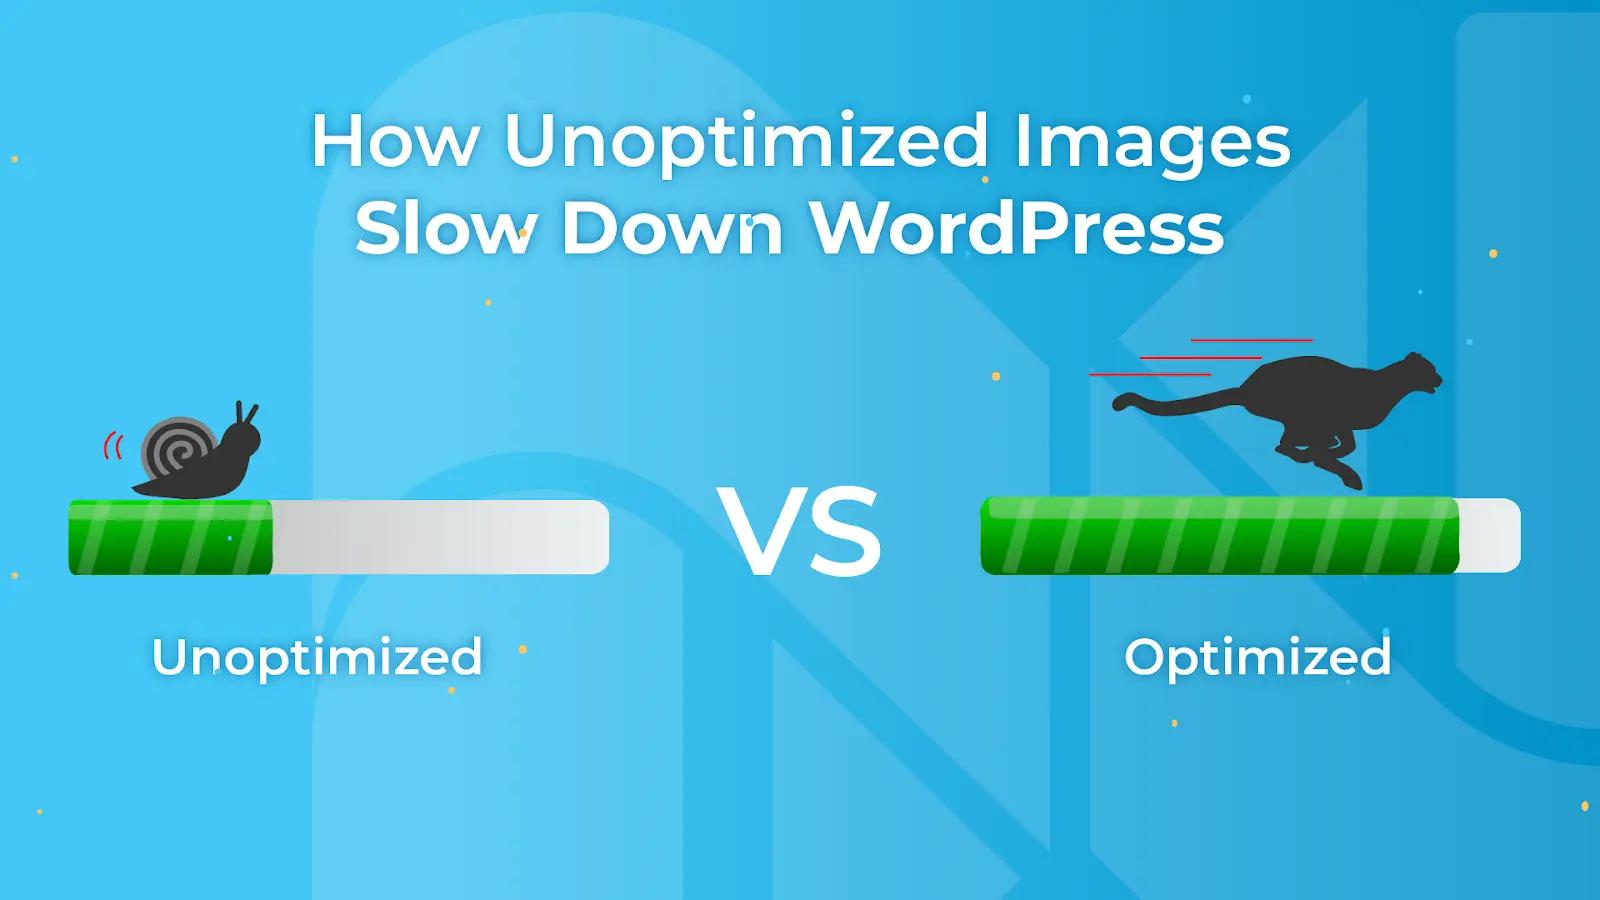 A graphic comparing unoptimized and optimized images in terms of site speed.